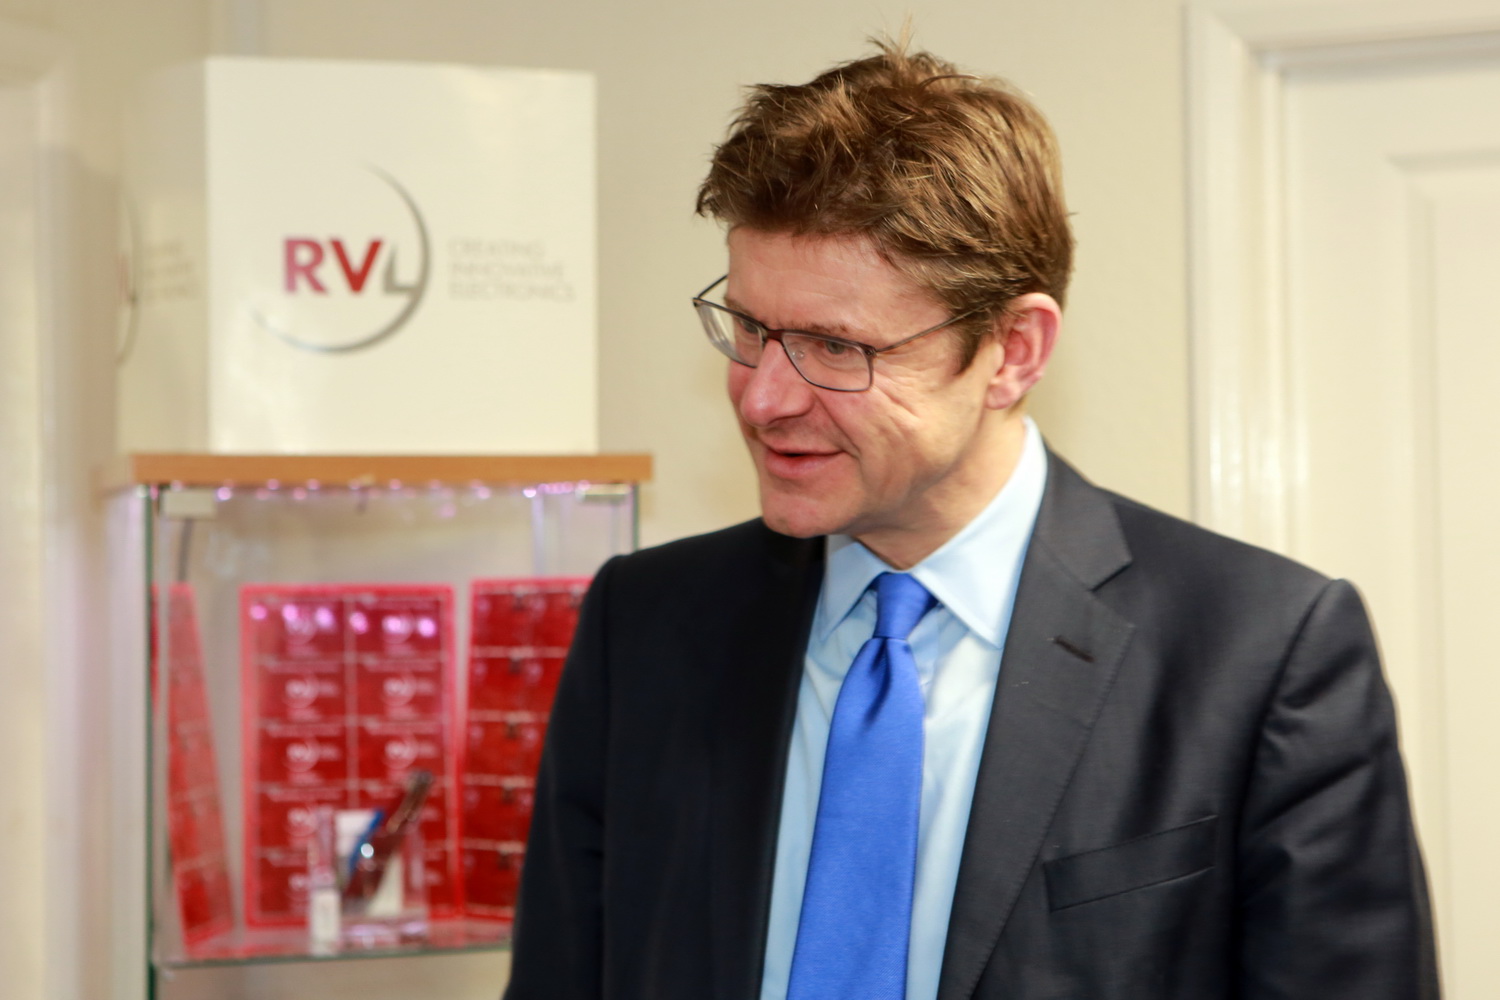 Greg Clark MP visits RVL to celebrate 25 years